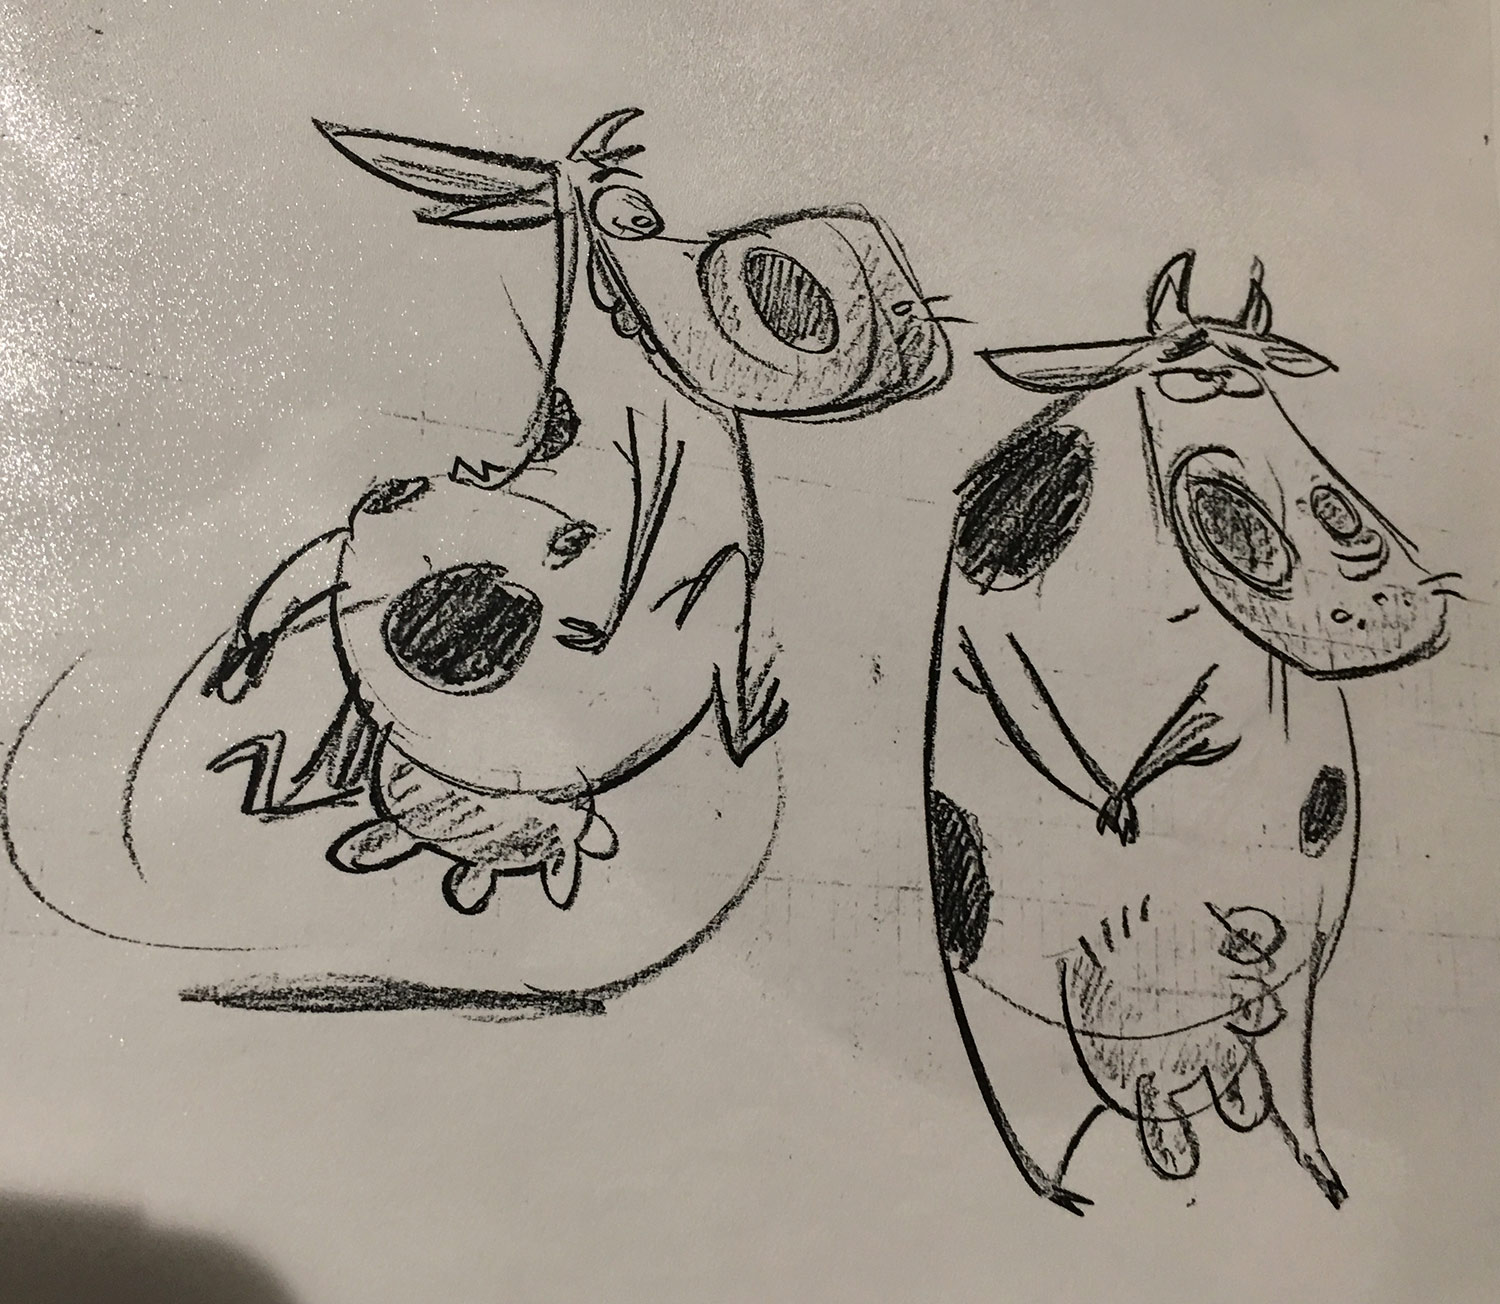 Early Cow development sketches